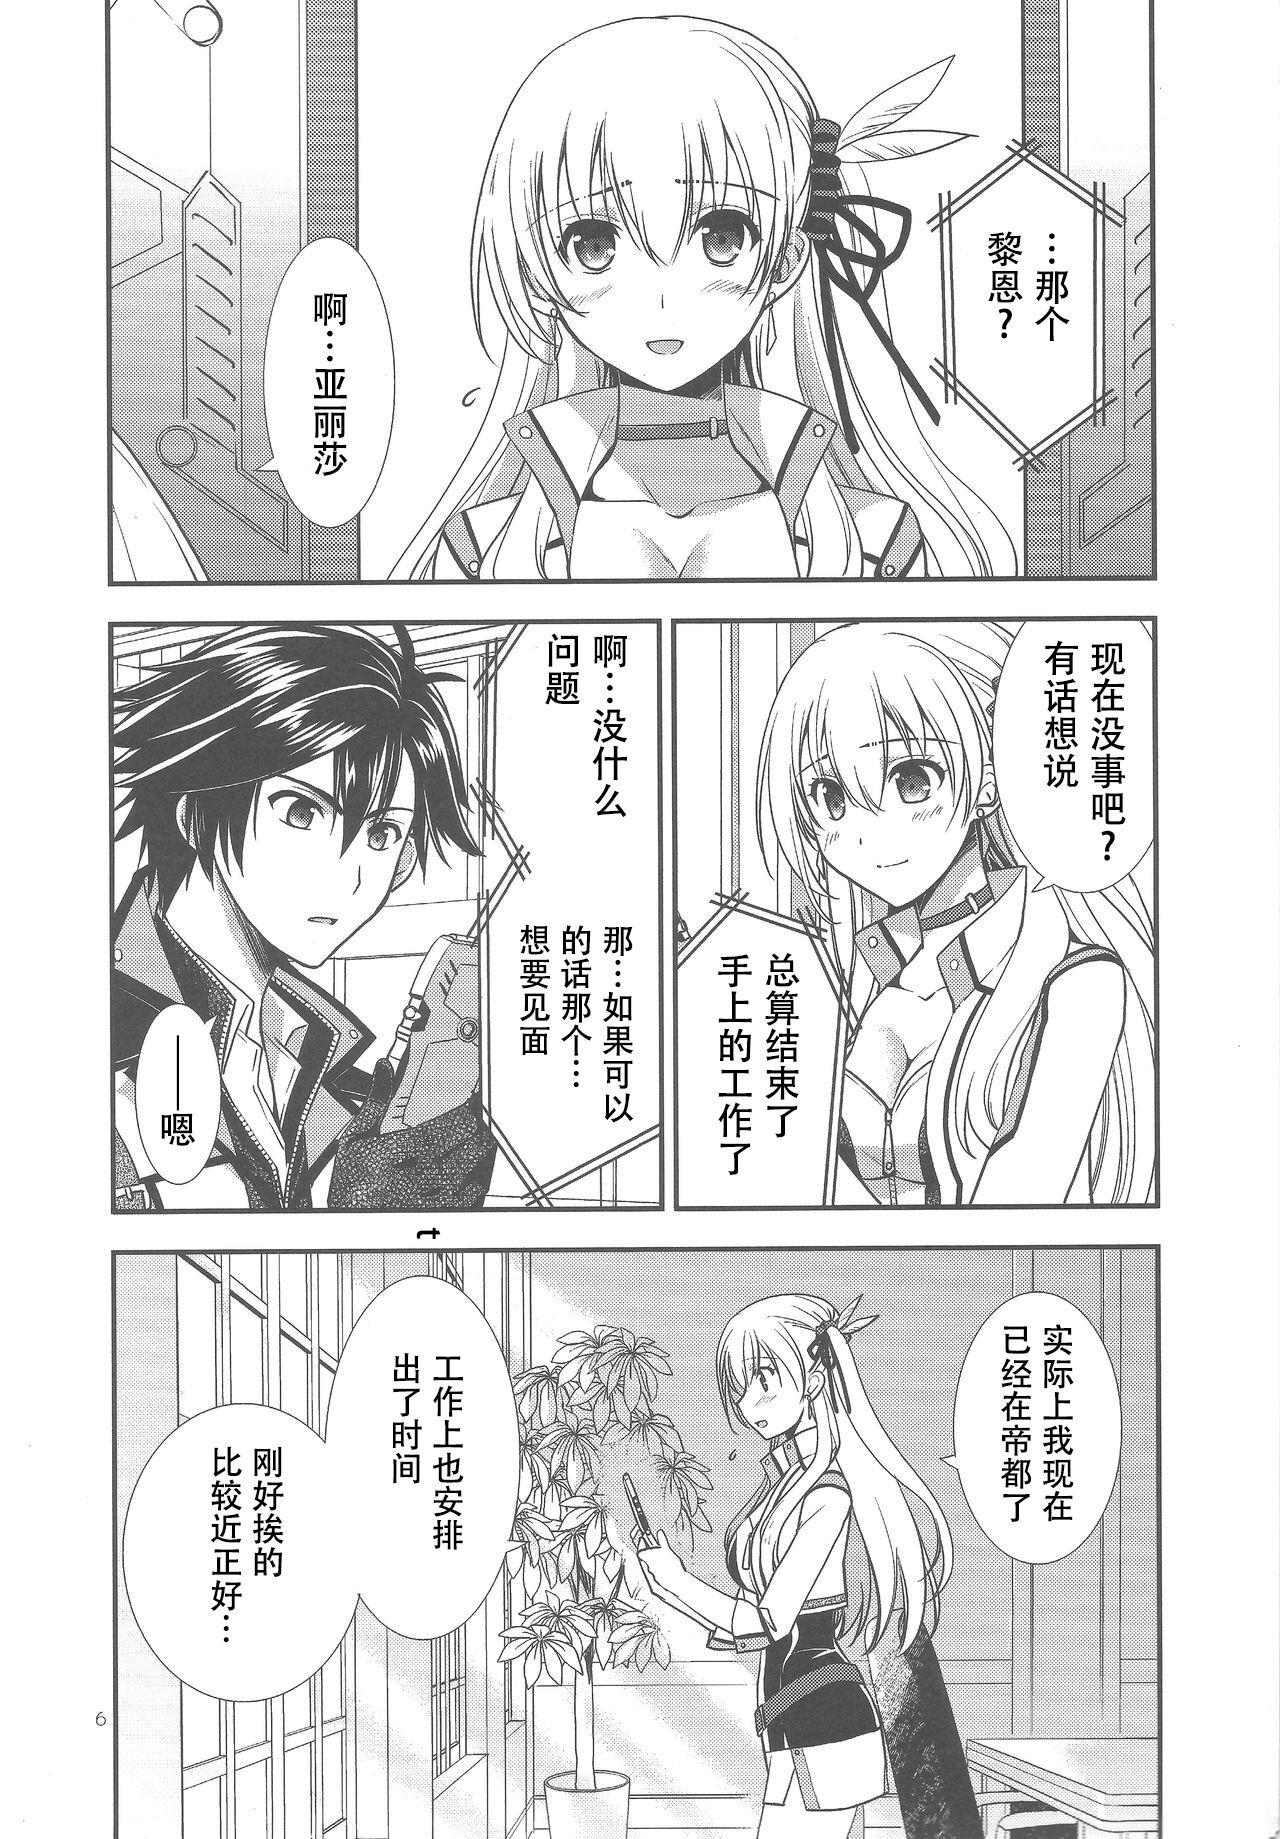 Cheating Wife Houkago Date - The legend of heroes | eiyuu densetsu Blows - Page 4